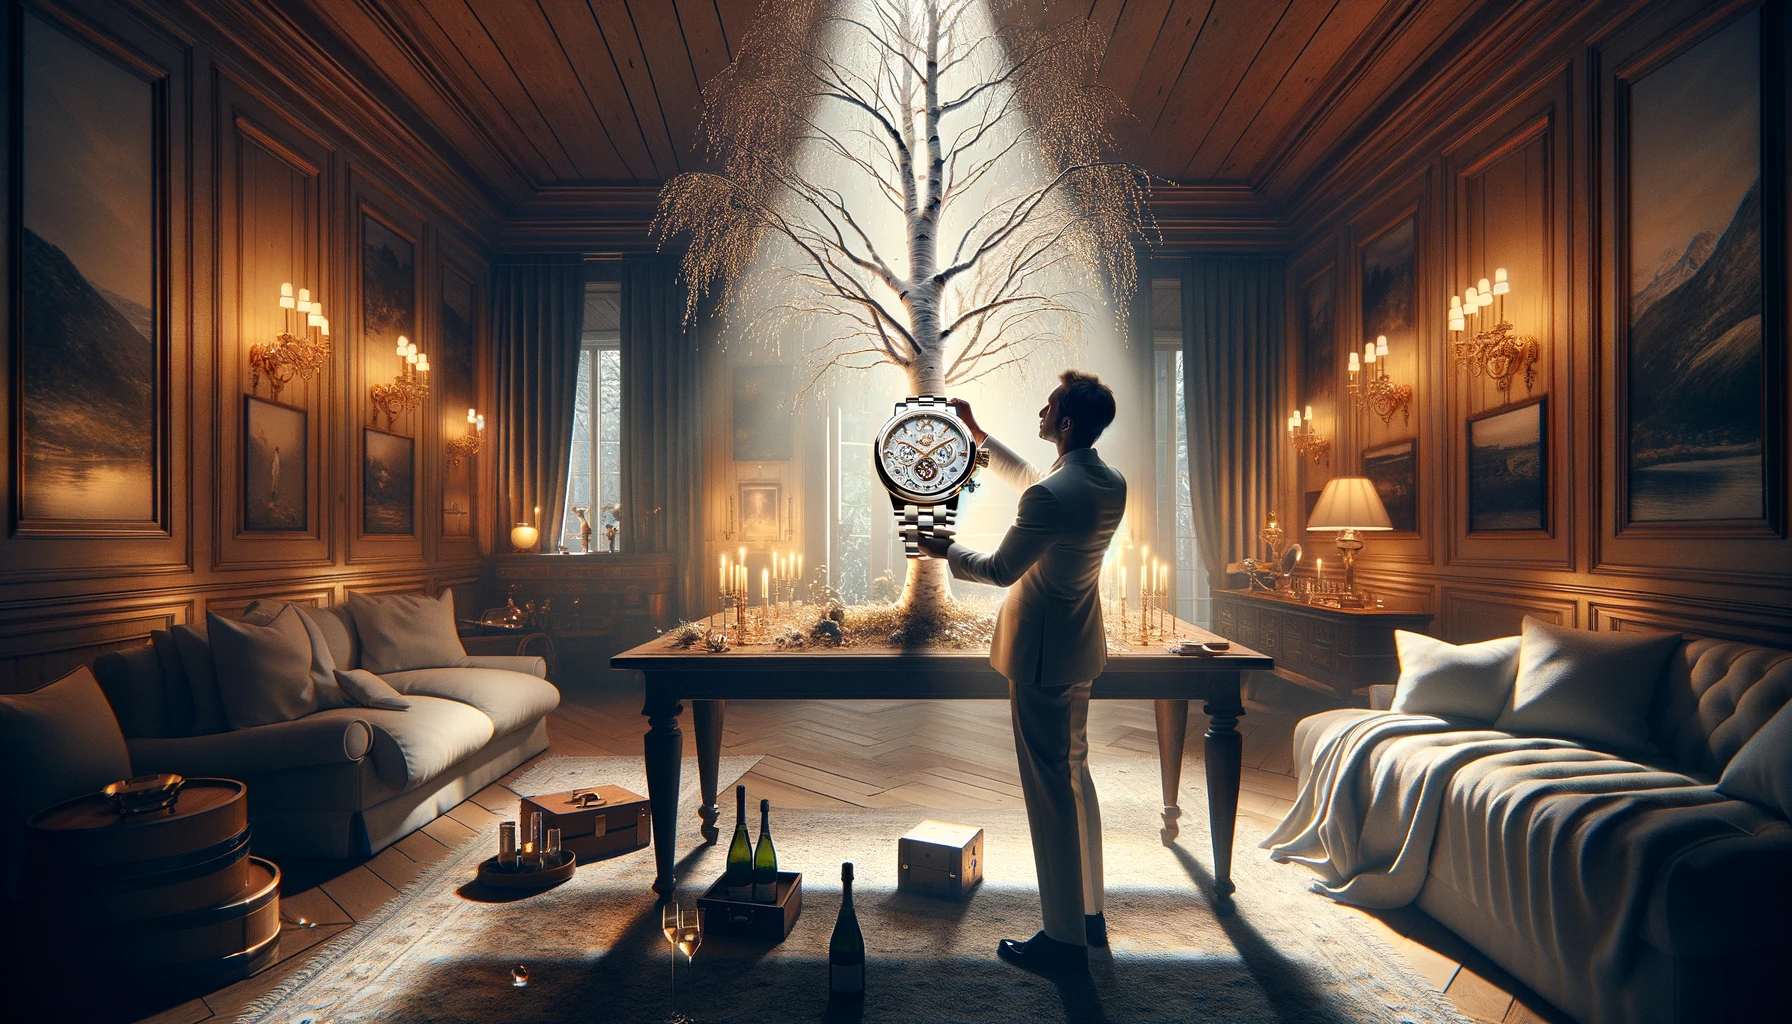 A scene capturing the triumphant moment when someone finally acquires a luxurious wristwatch inspired by the white birch tree, after overcoming its difficult availability. The setting is celebratory and intimate, perhaps in the interior of a lavish home or a private collectors' club, where the new owner is holding the wristwatch up to the light, admiring its elegance and the intricate details that evoke the white birch. The atmosphere is filled with a sense of achievement and satisfaction, with the watch's shimmering face and sleek design catching the light beautifully. The room could be adorned with subtle nods to the owner's perseverance and taste for luxury, such as fine art on the walls and a glass of champagne on a nearby table, ready to toast to this significant acquisition. The overall mood is one of joy and exclusivity, highlighting the special connection between the collector and the sought-after timepiece.